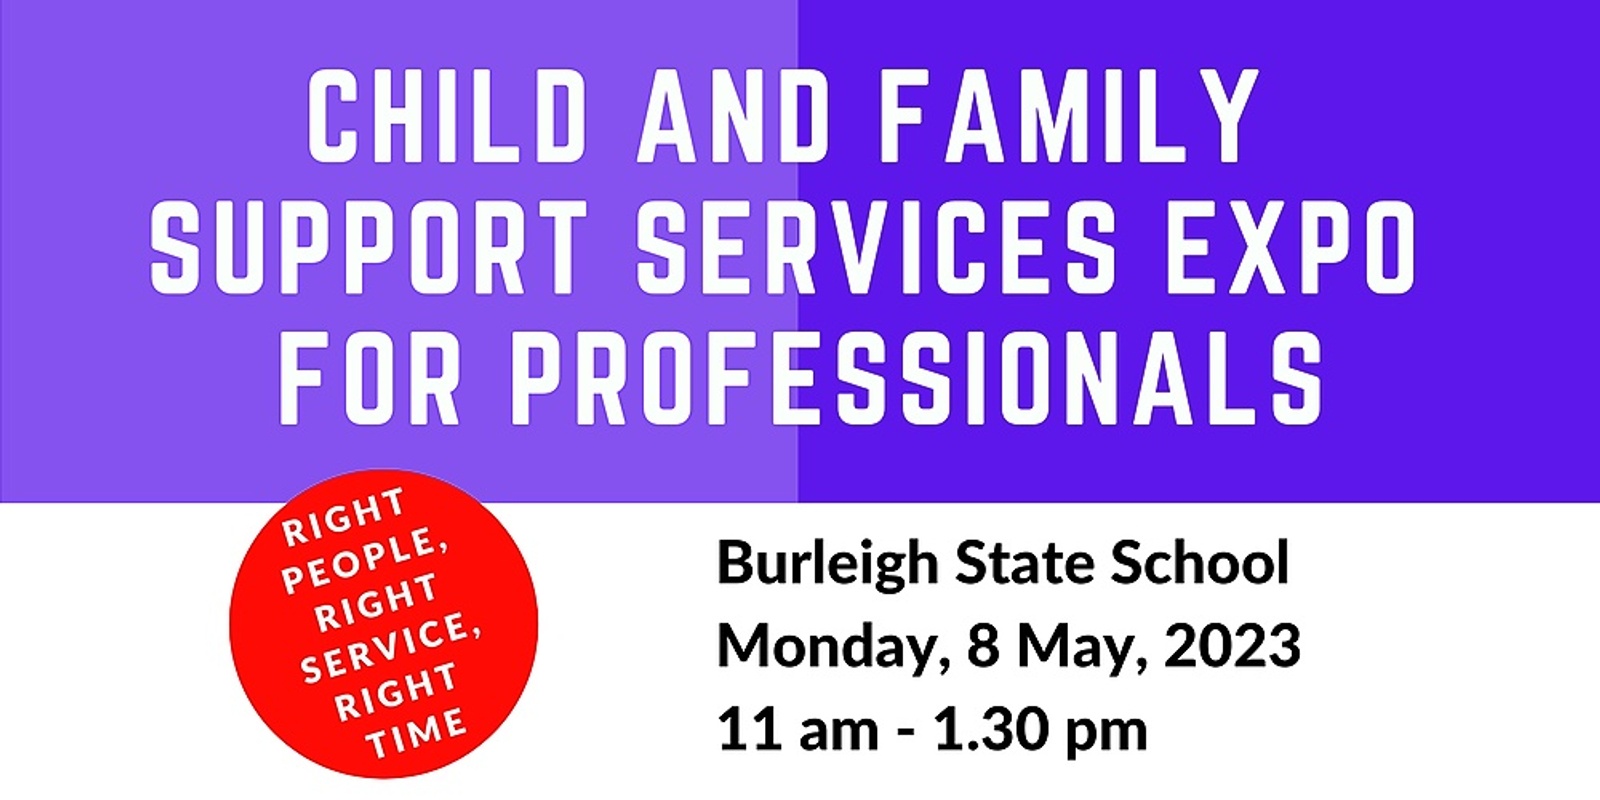 Banner image for GC Child and Family Services Expo for Professionals - Burleigh